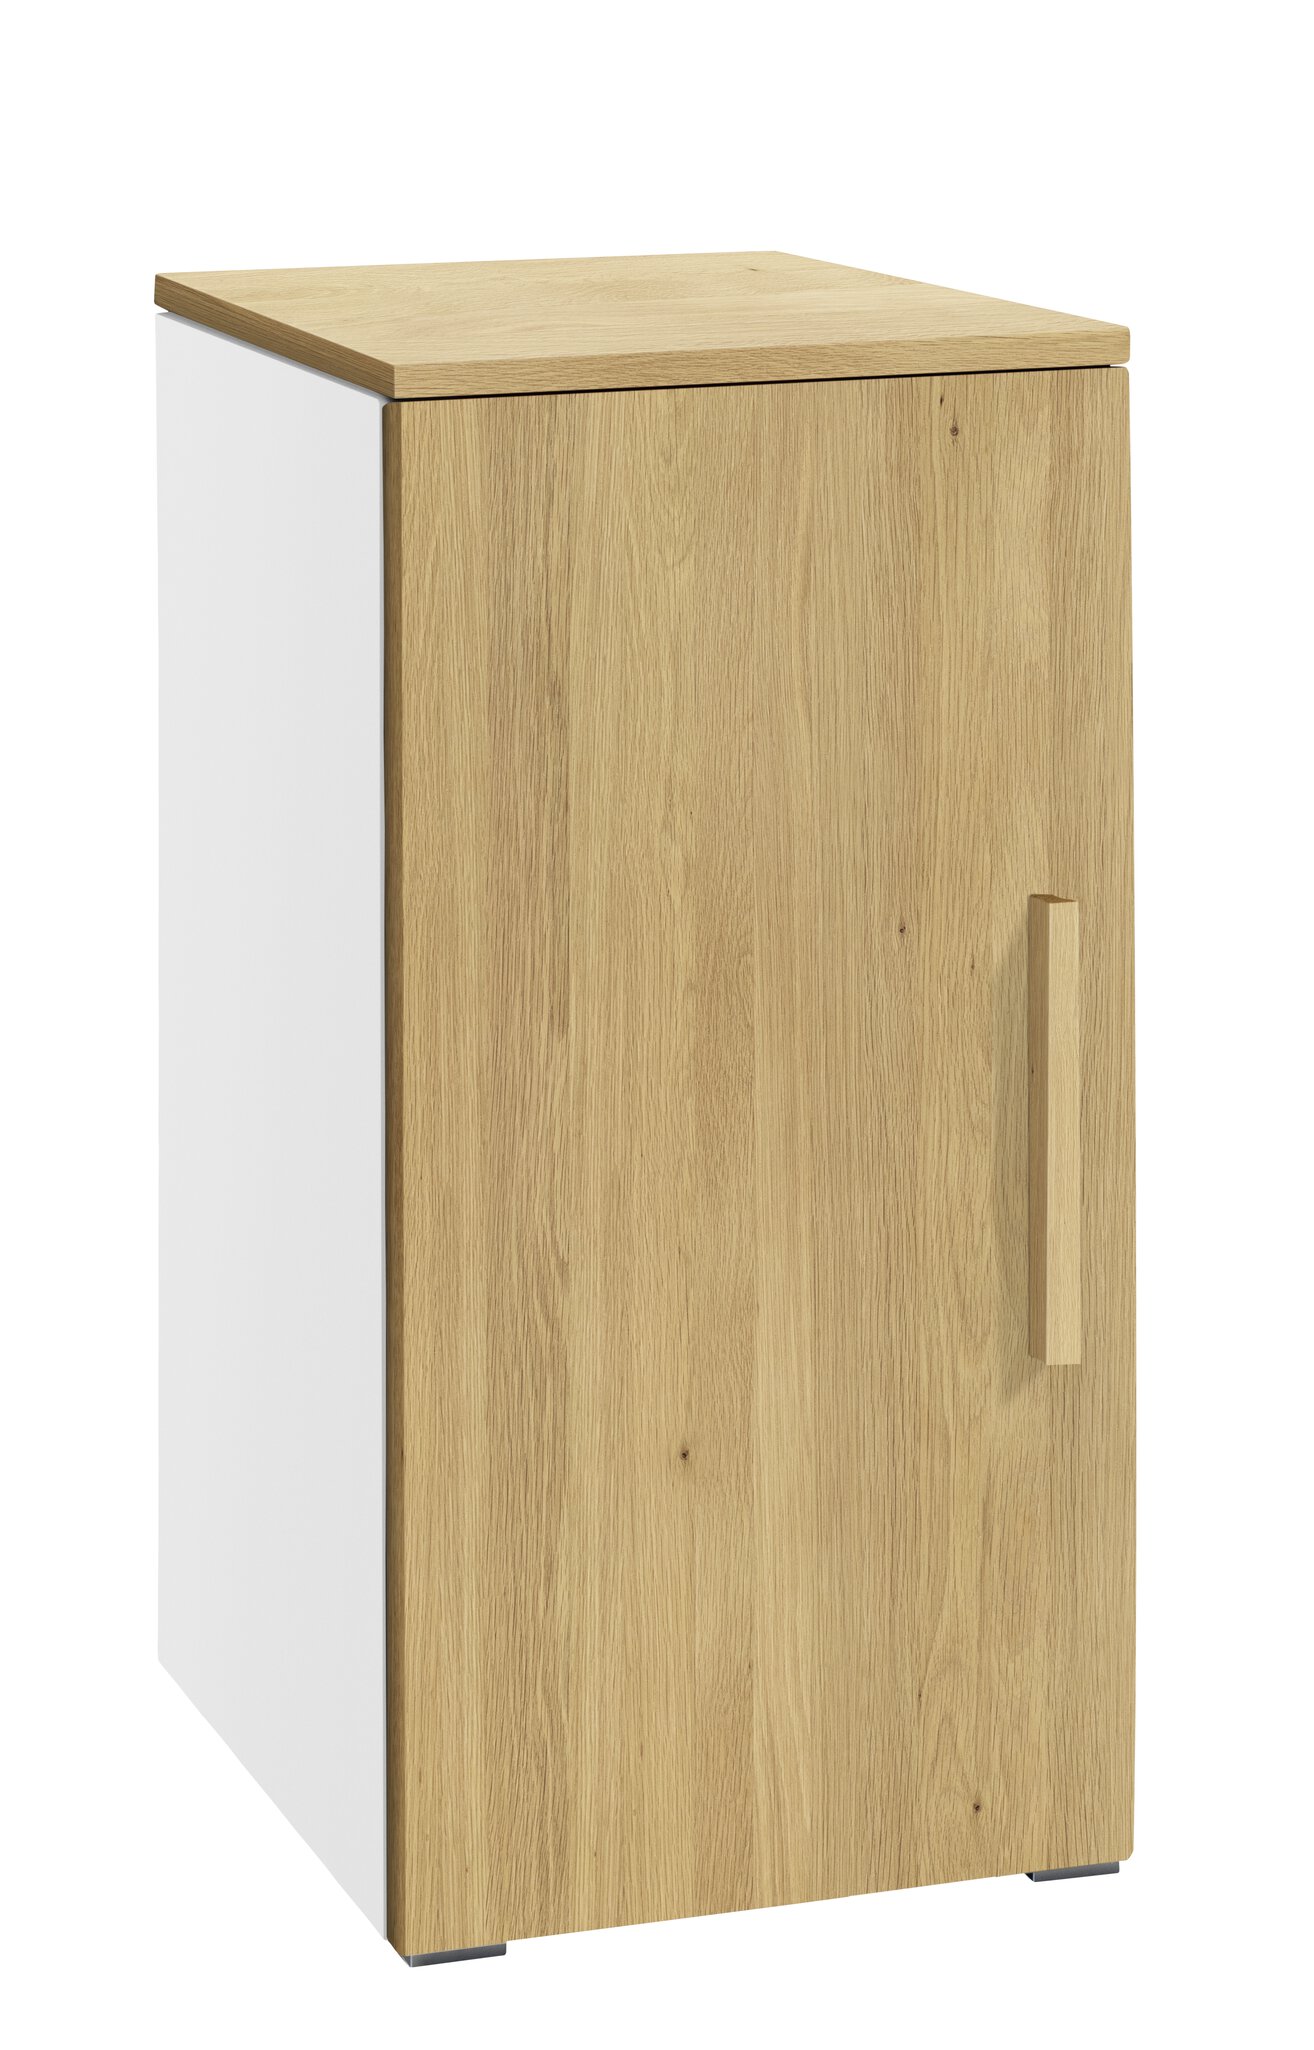 Unito chest of drawers